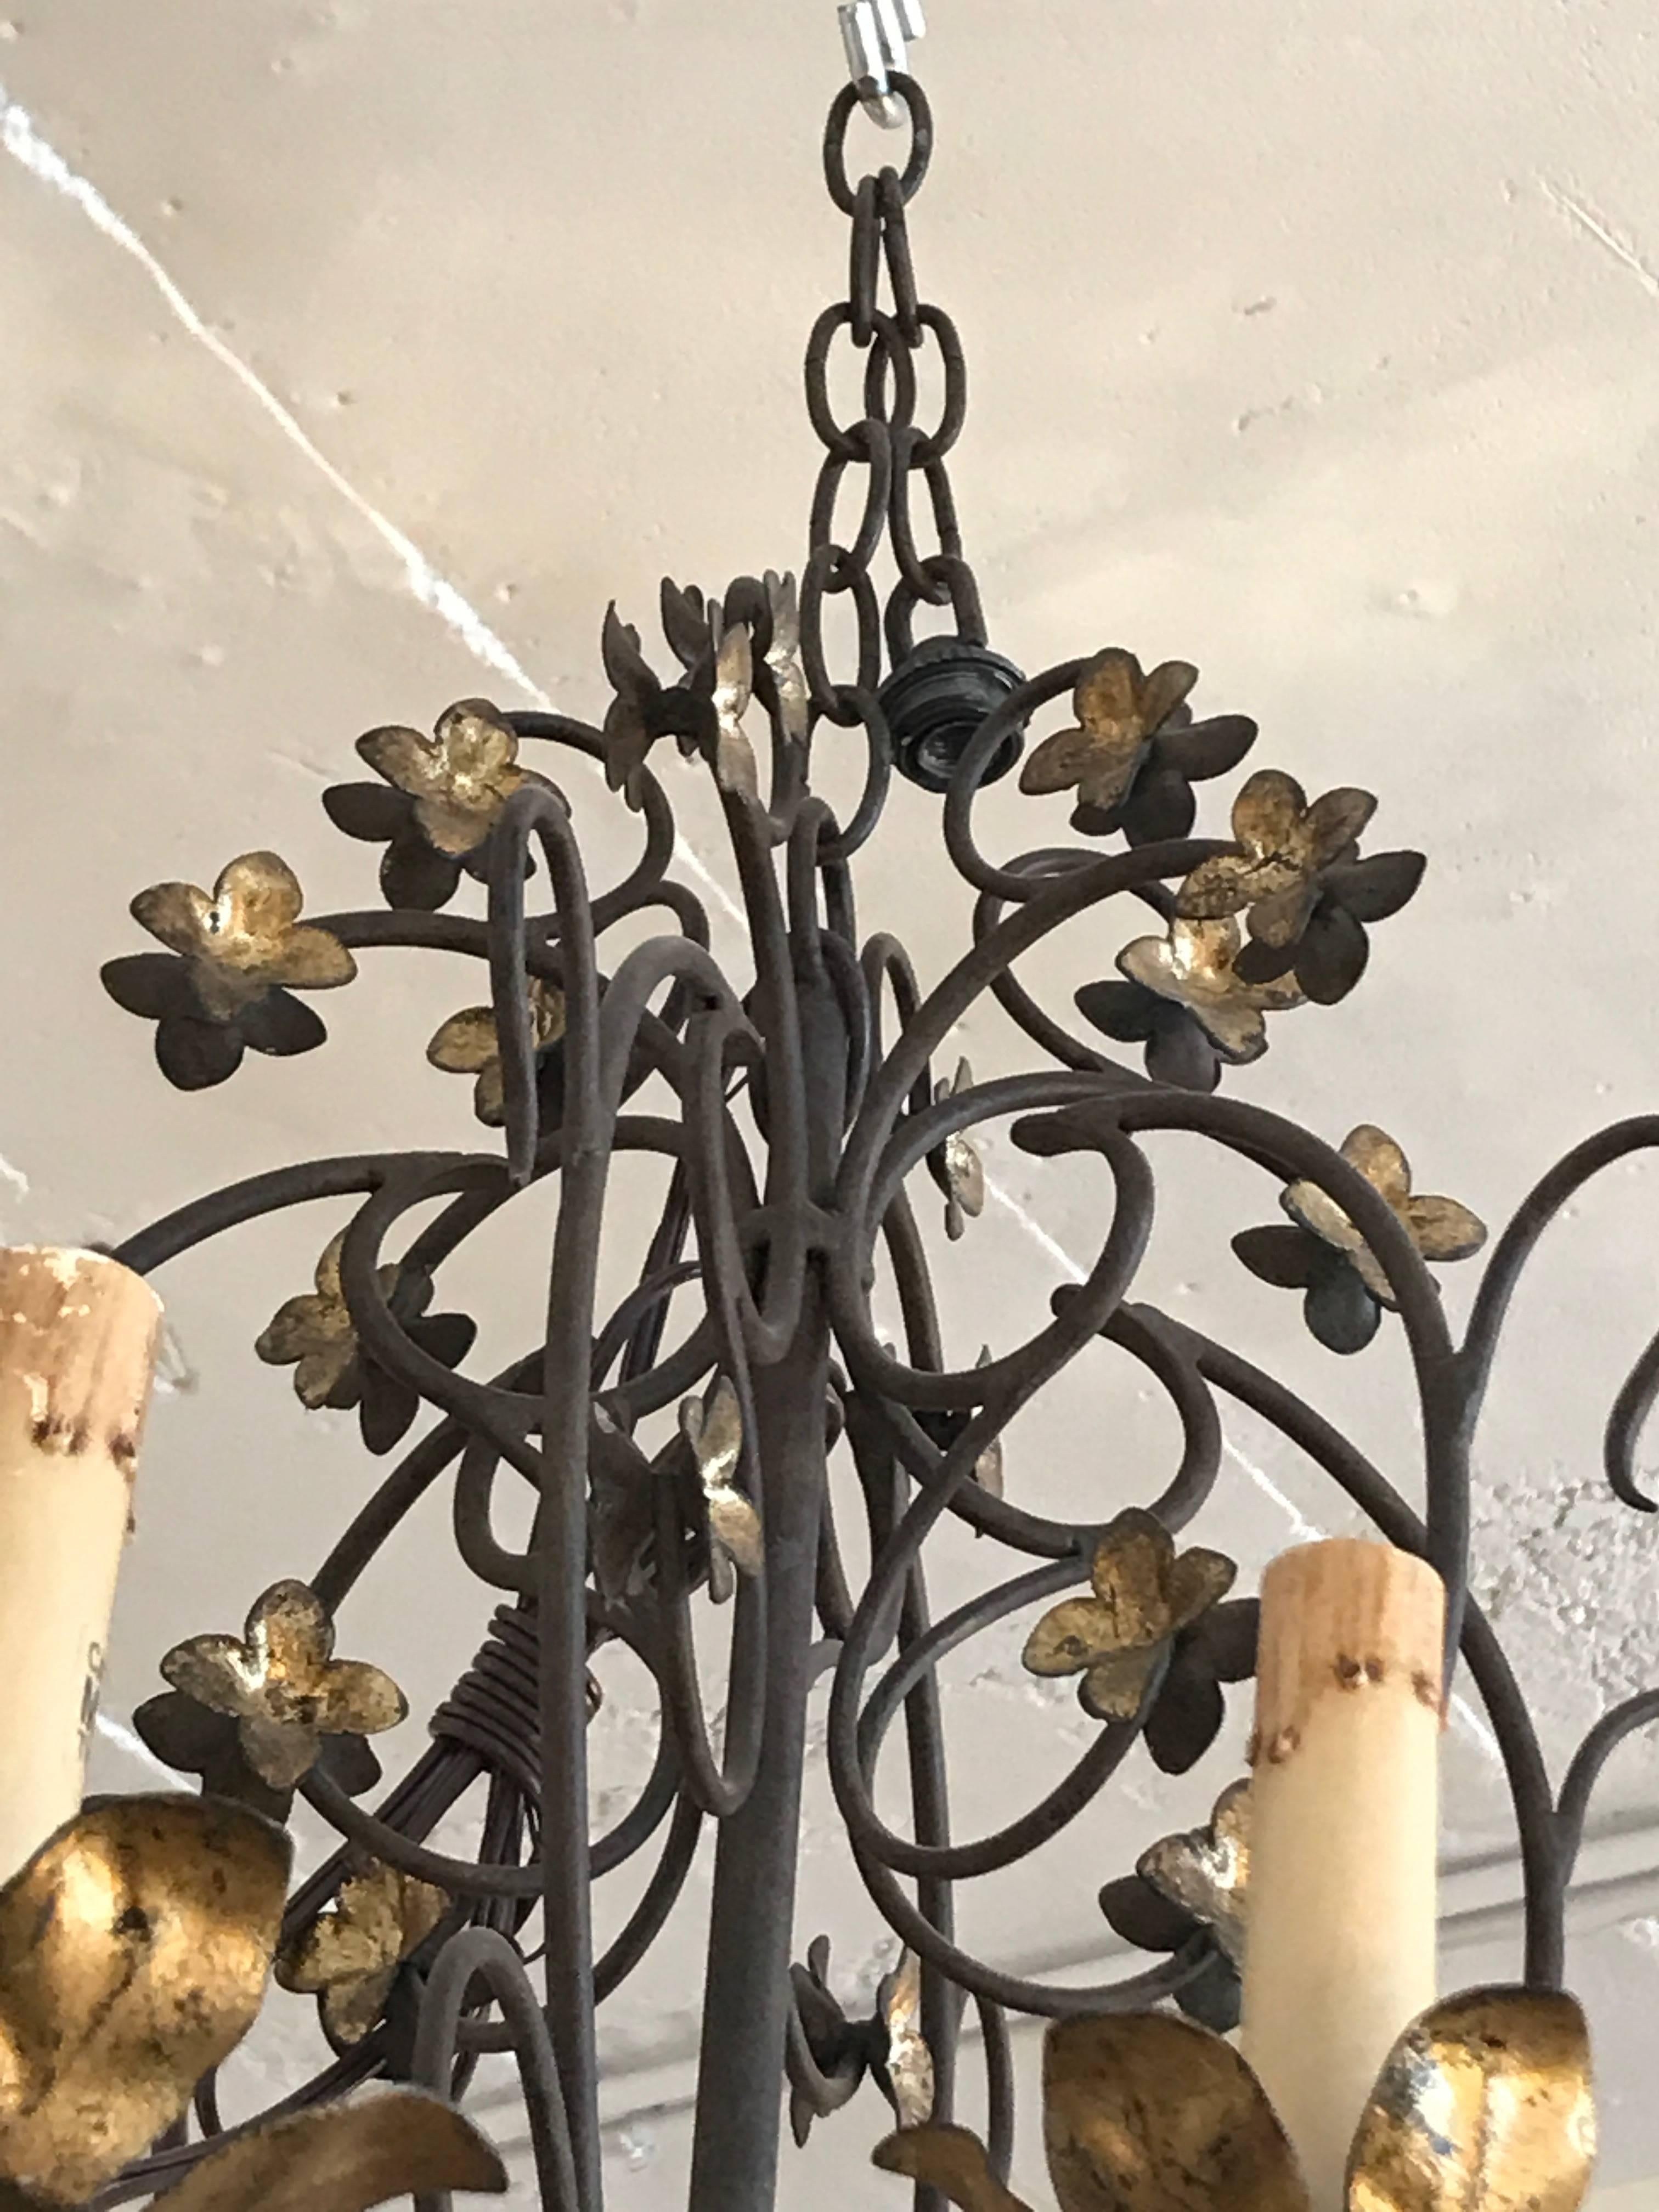 Gilded wrought iron chandelier.